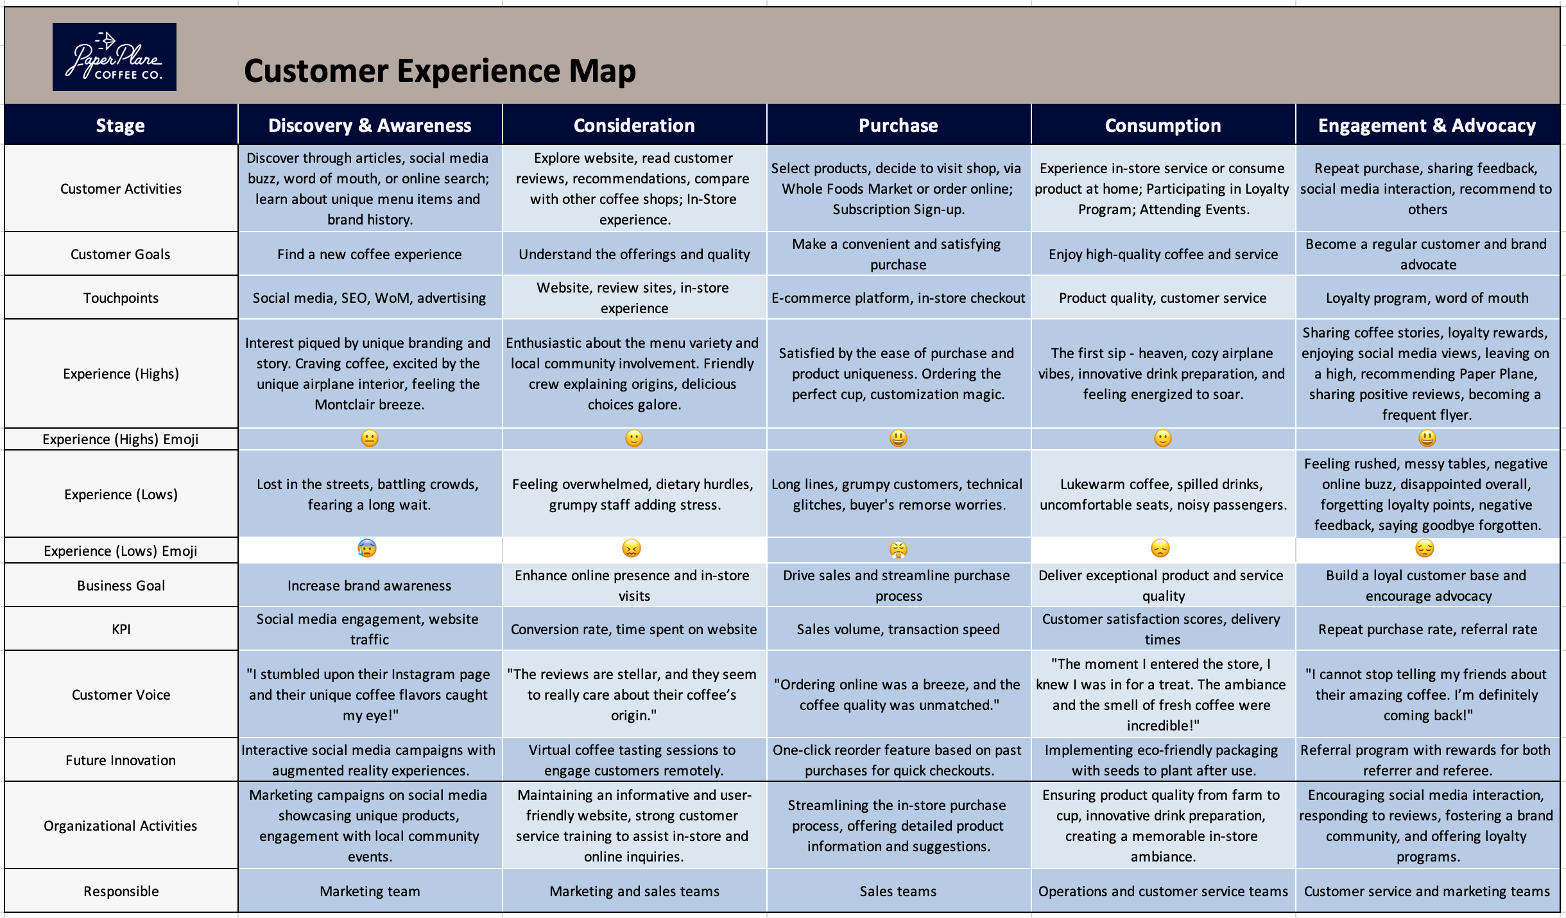 Paper Plane Coffee - Customer Experience Map